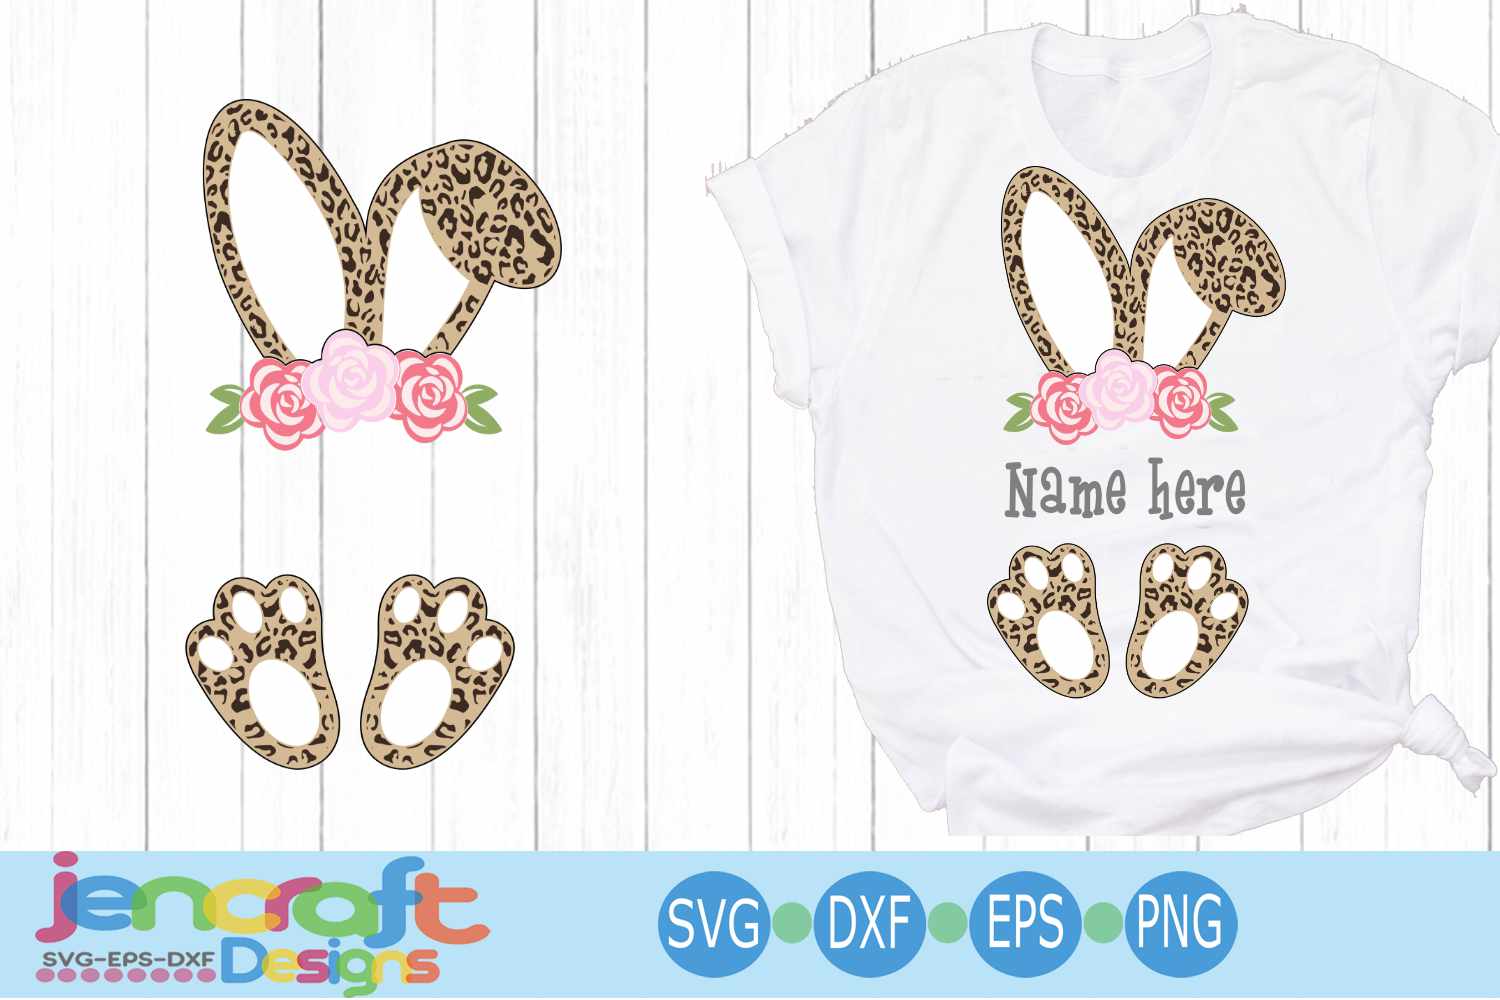 Download Easter svg, Floral Cheetah print bunny ears feet Leopard